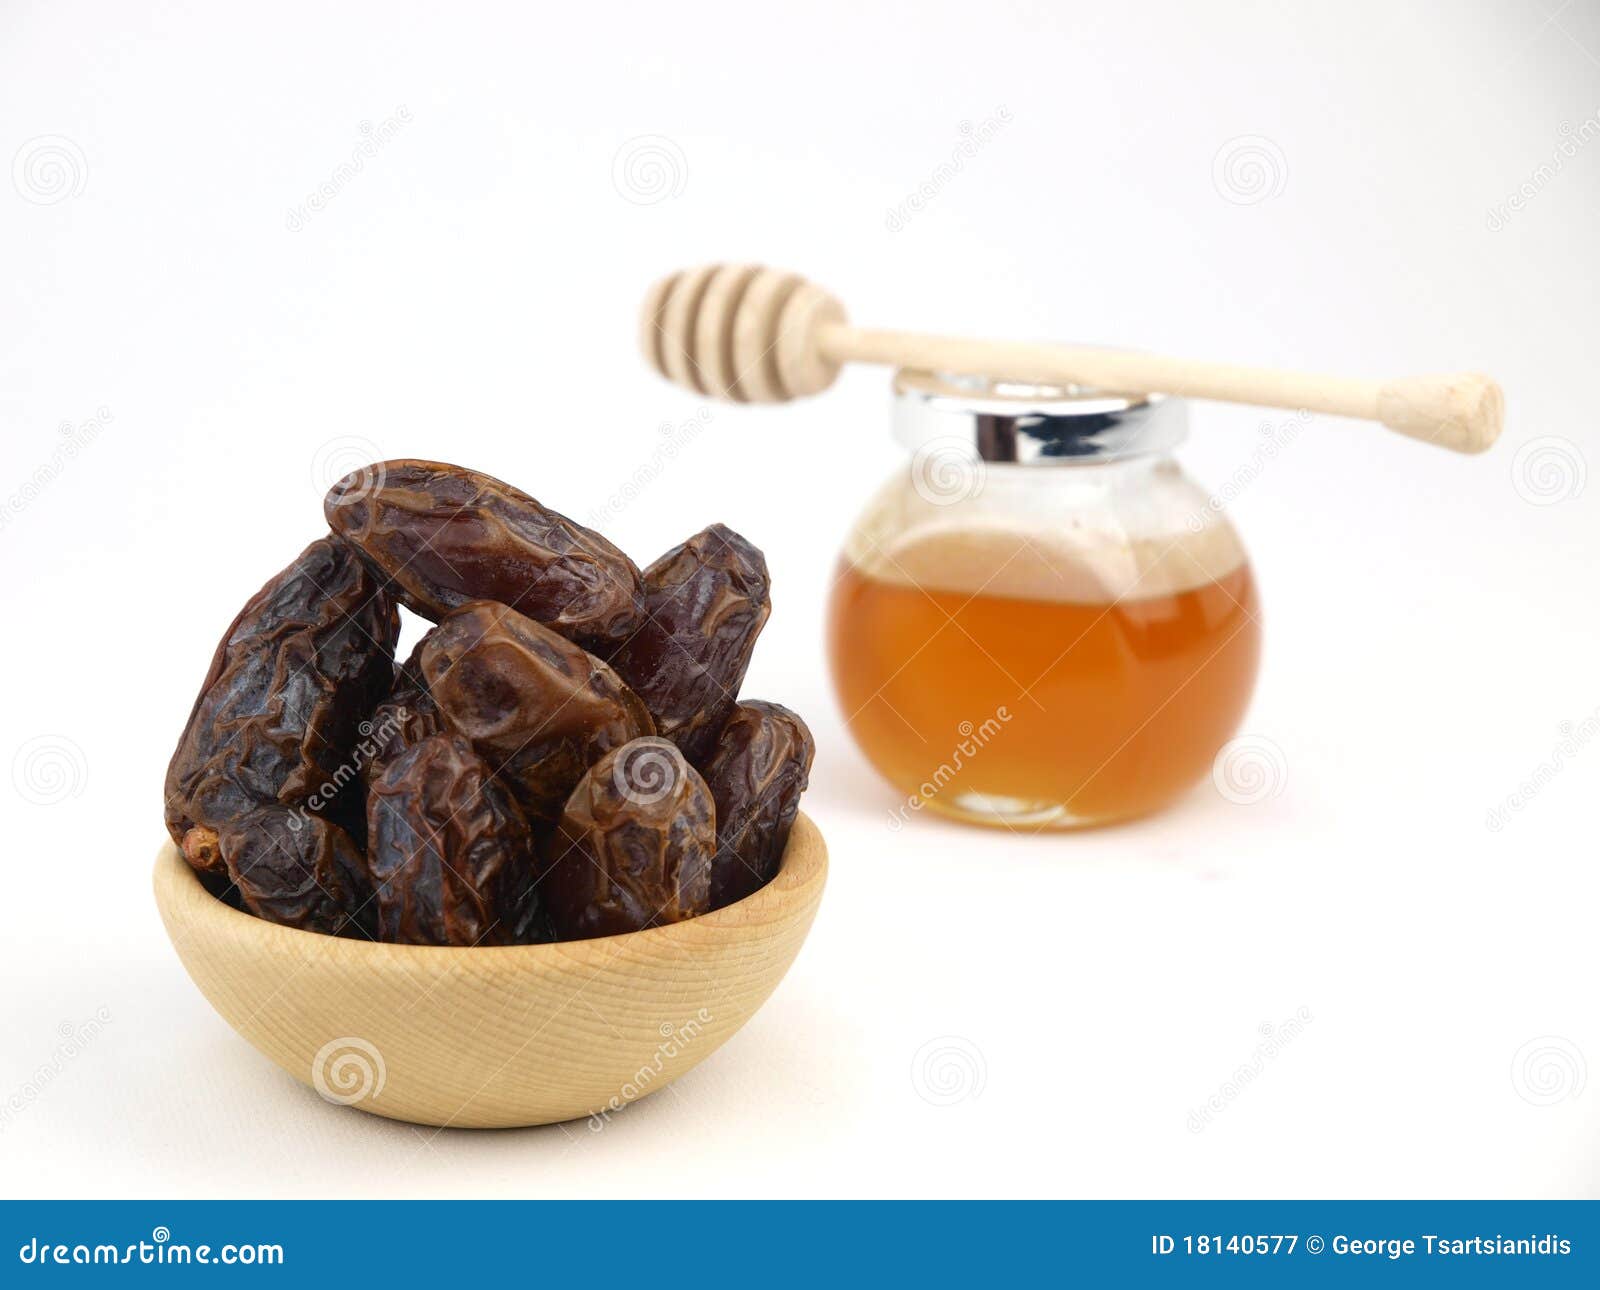 dried black dates with honey